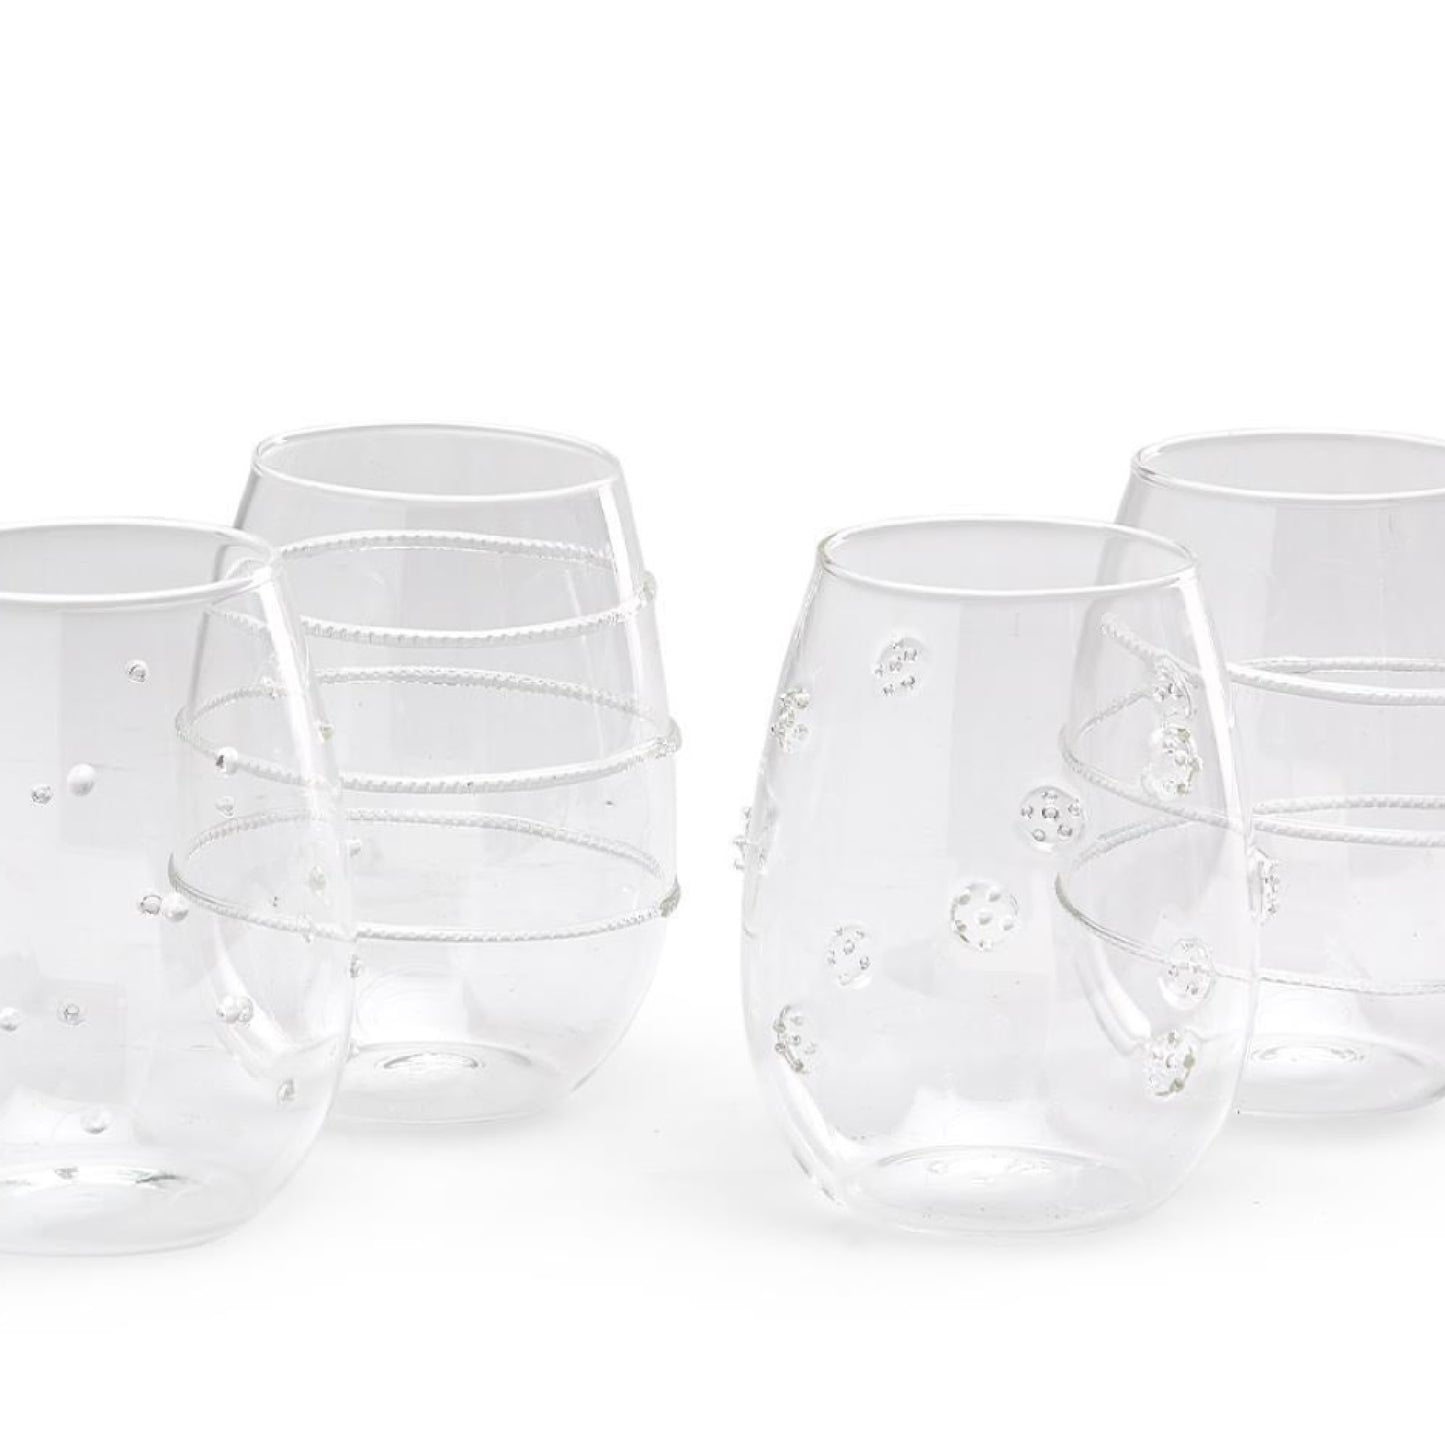 STEMLESS WINE GLASSES WITH DESIGNS